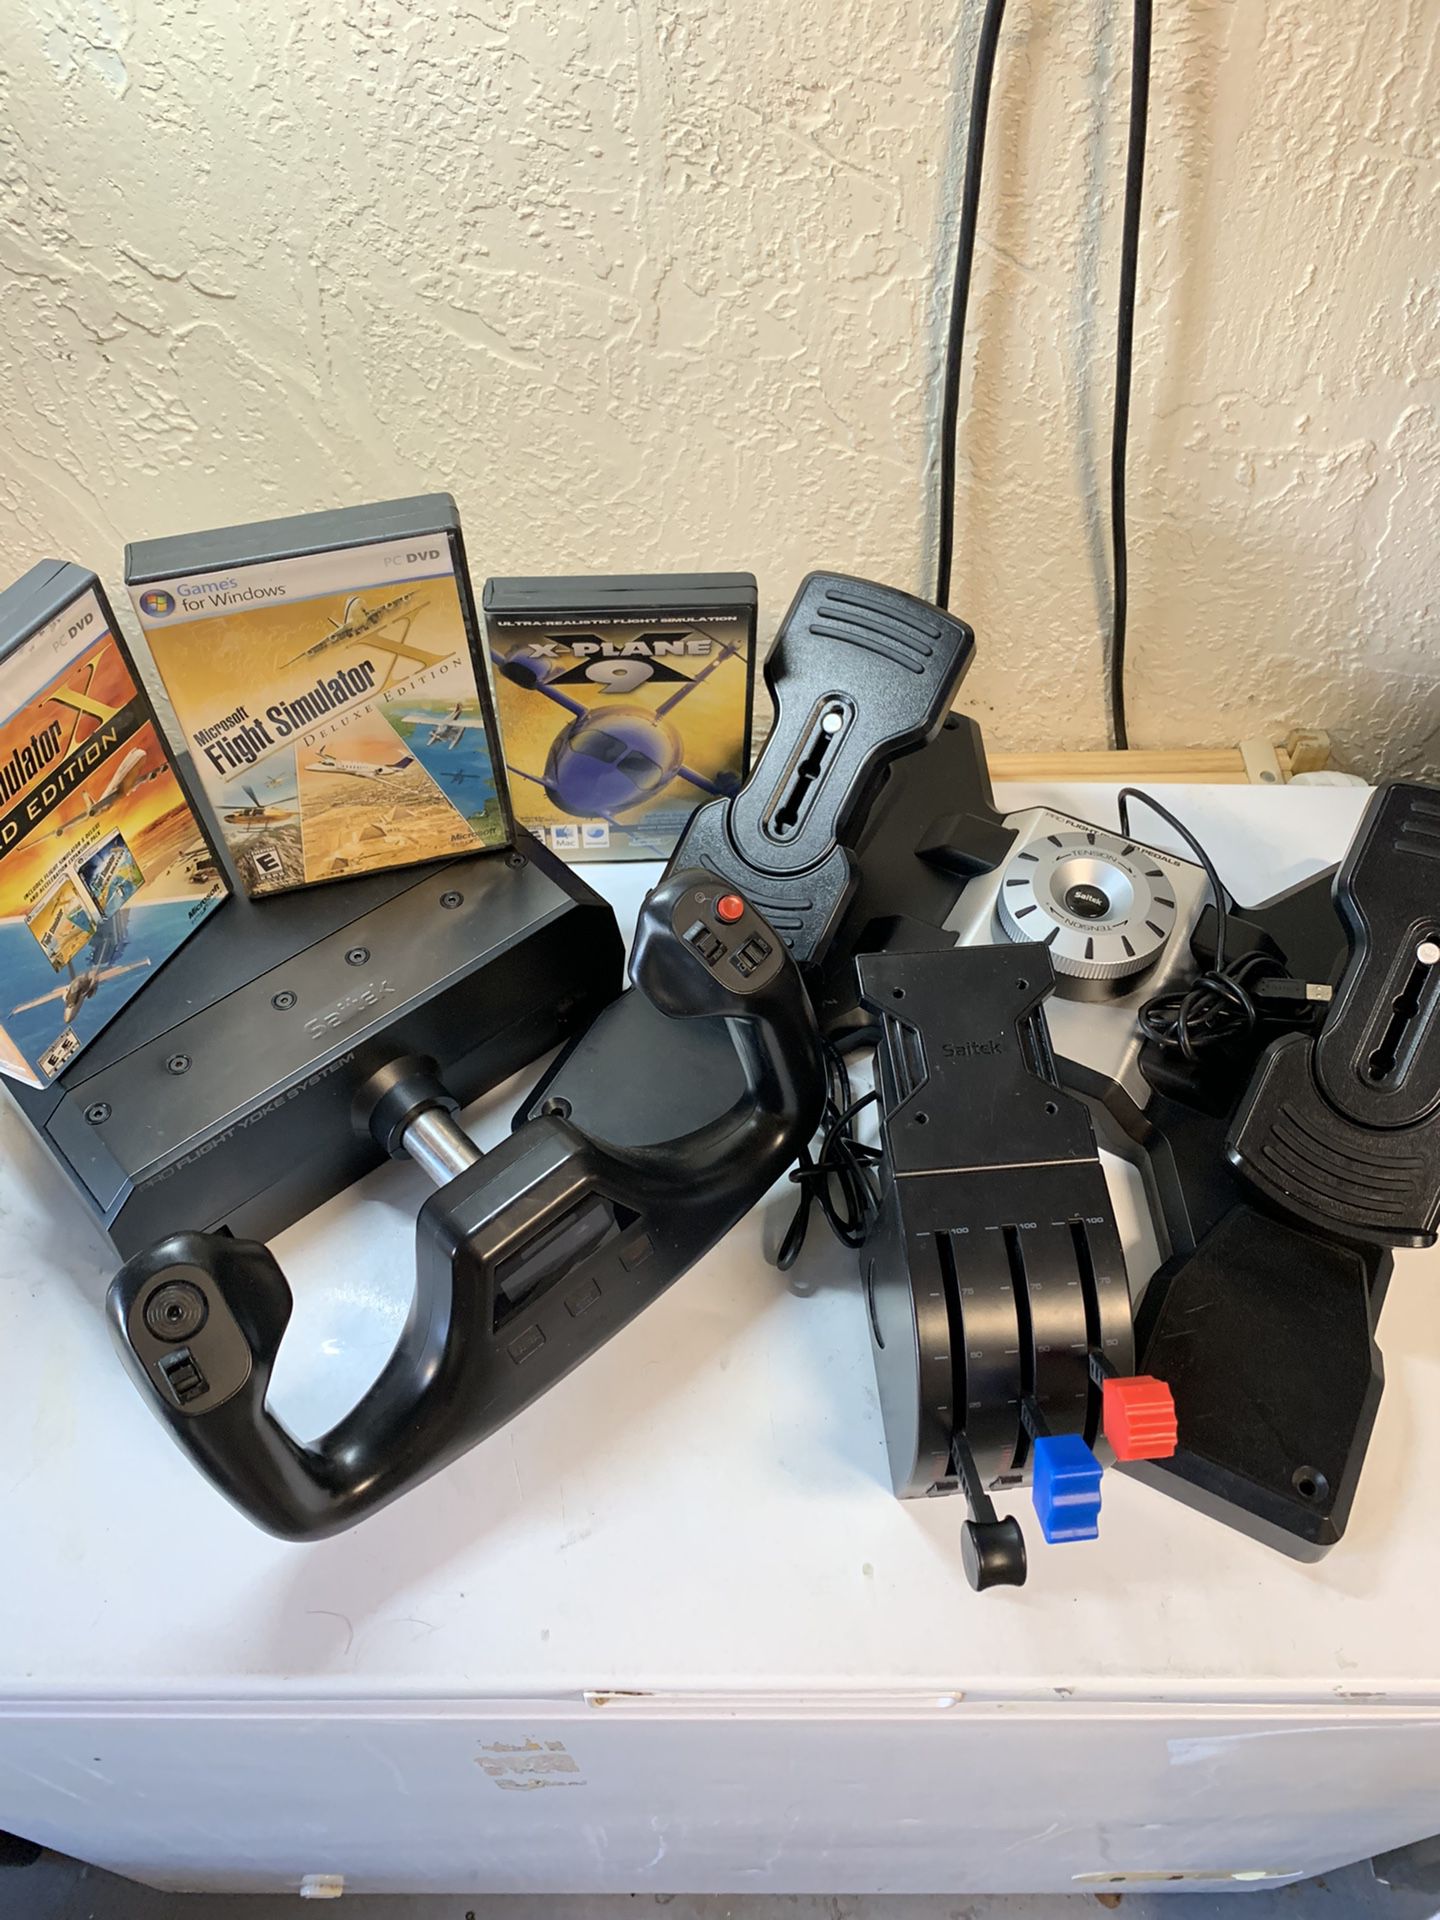 Flight Simulator With Games Included